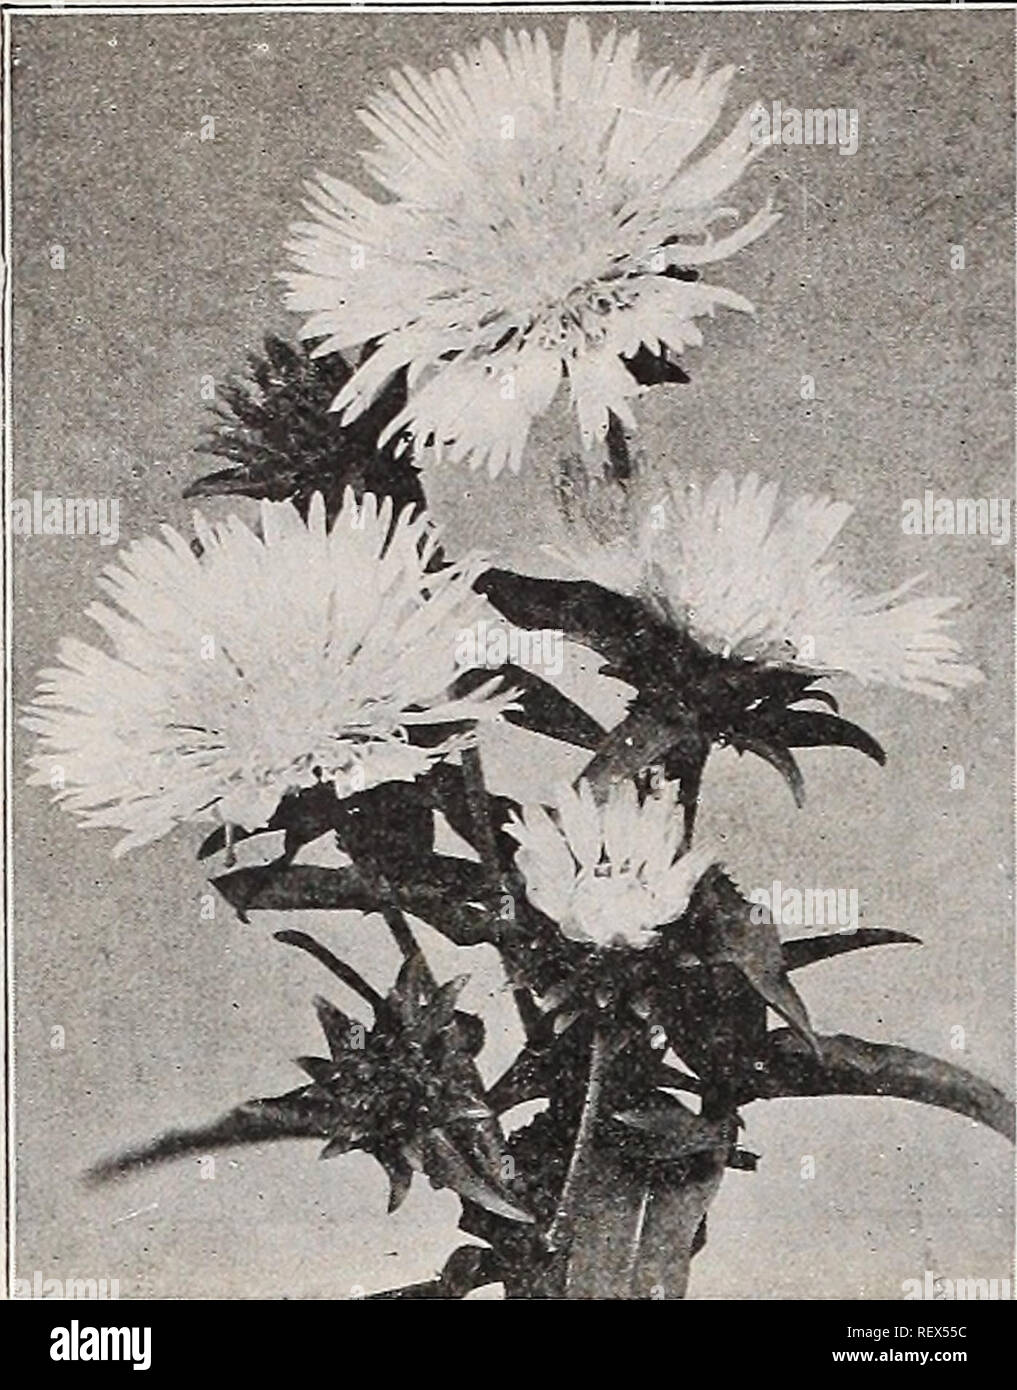 . Dreer's wholesale price list : seeds for florists plants vegetable seeds, tools, fertilizers and sundries. Bulbs (Plants) Catalogs; Flowers Seeds Catalogs; Vegetables Seeds Catalogs; Nurseries (Horticulture) Catalogs. 50 HMRY A. DEEER, Philadelphia, Pa.. Stokesia Cyanea Spiraea Aruncus Kneiffi. This handsome Meadow Beauty is practically unknown. It is per- fectly hardy and should find a place in a damp position in the per- ennial border, where, under favorable conditions, it will form a plant 3 to 4 feet high, with finely divided, graceful, fern-like foliage and great sprays of feathery, sil Stock Photo